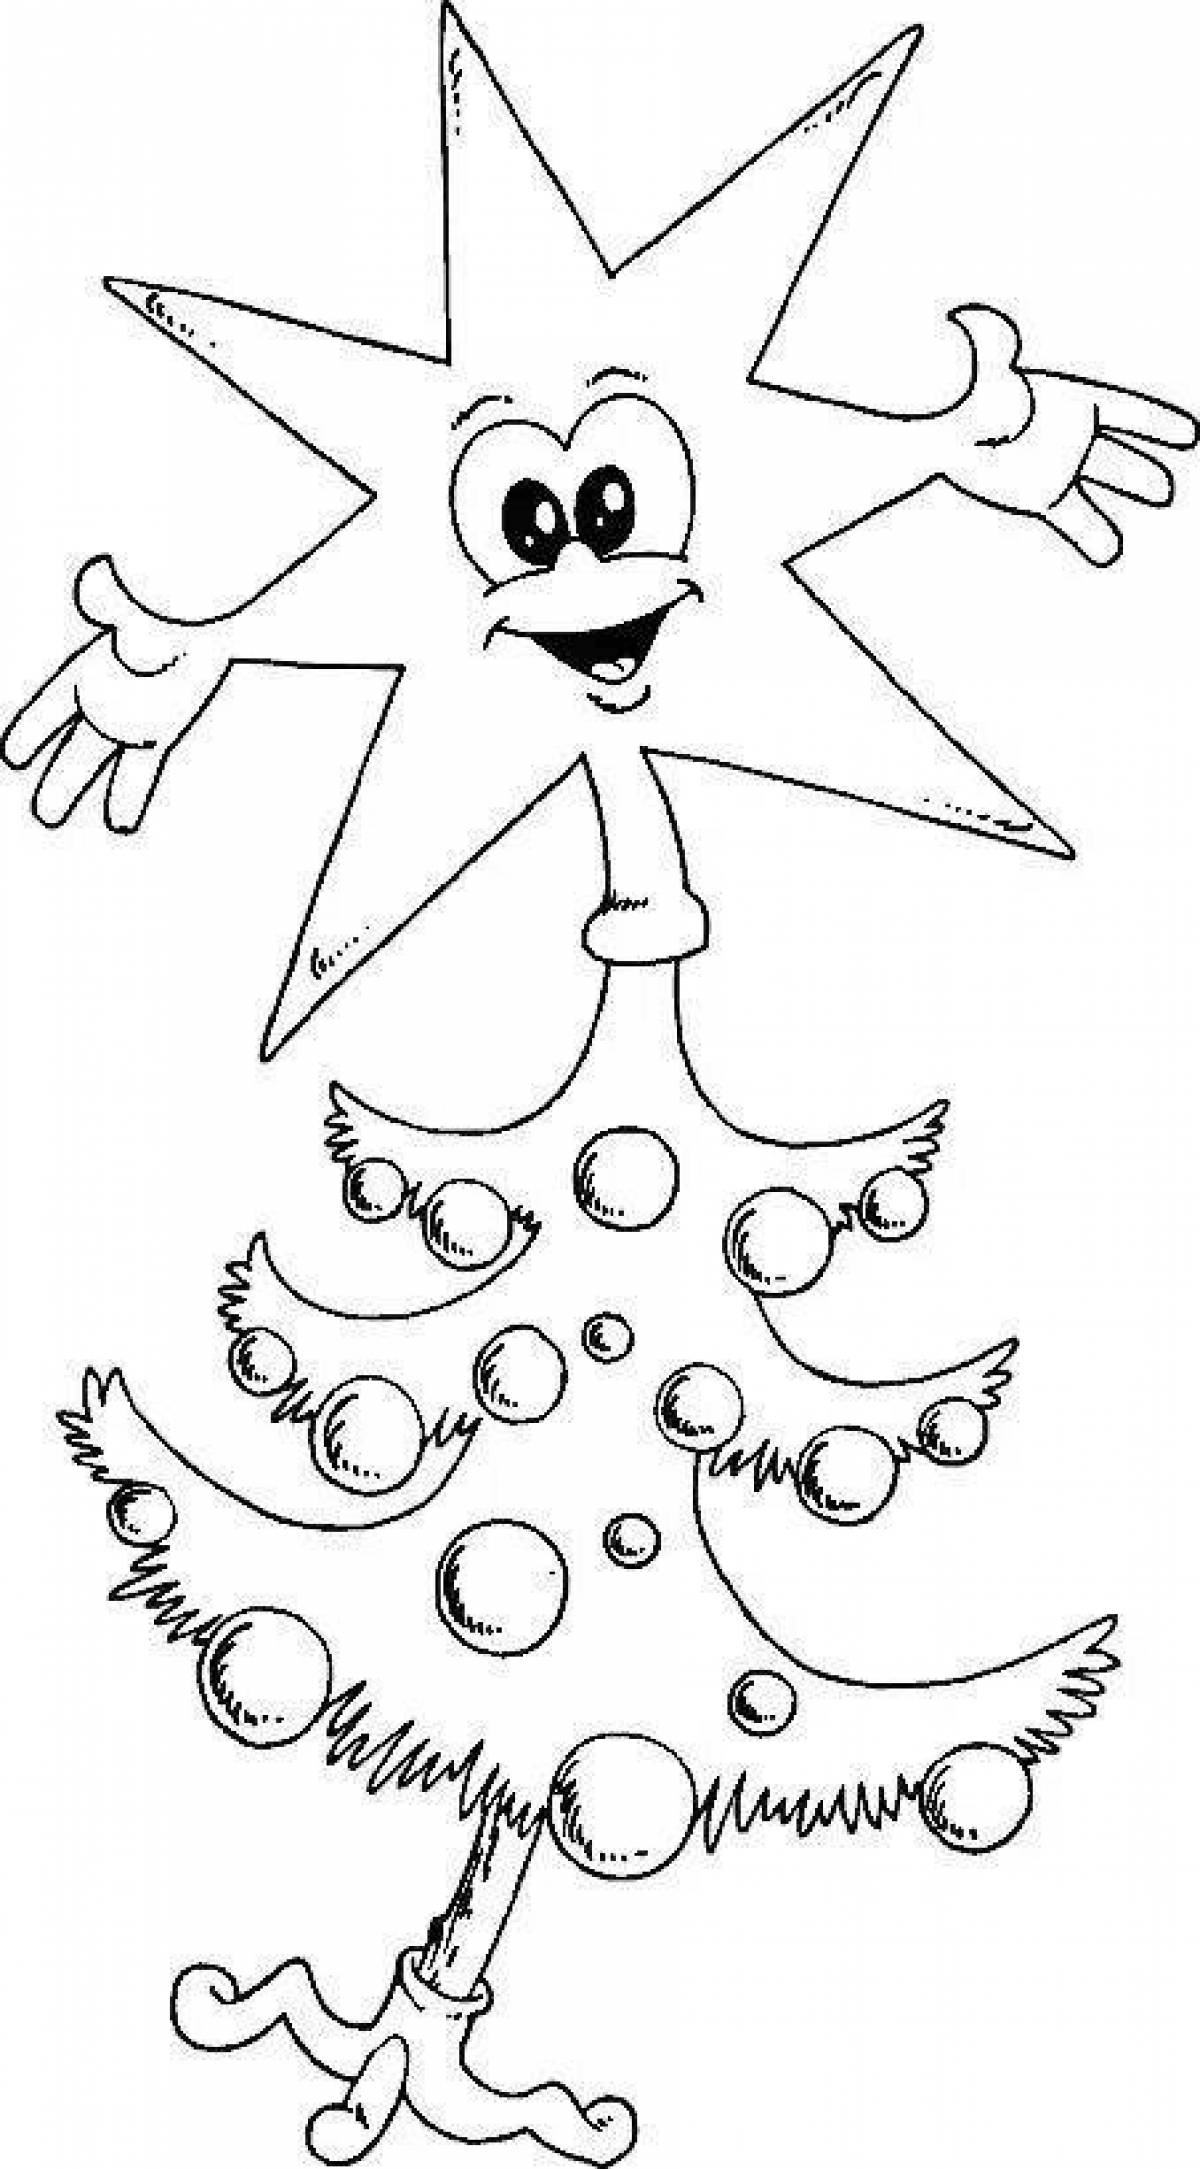 Glowing Christmas star coloring page